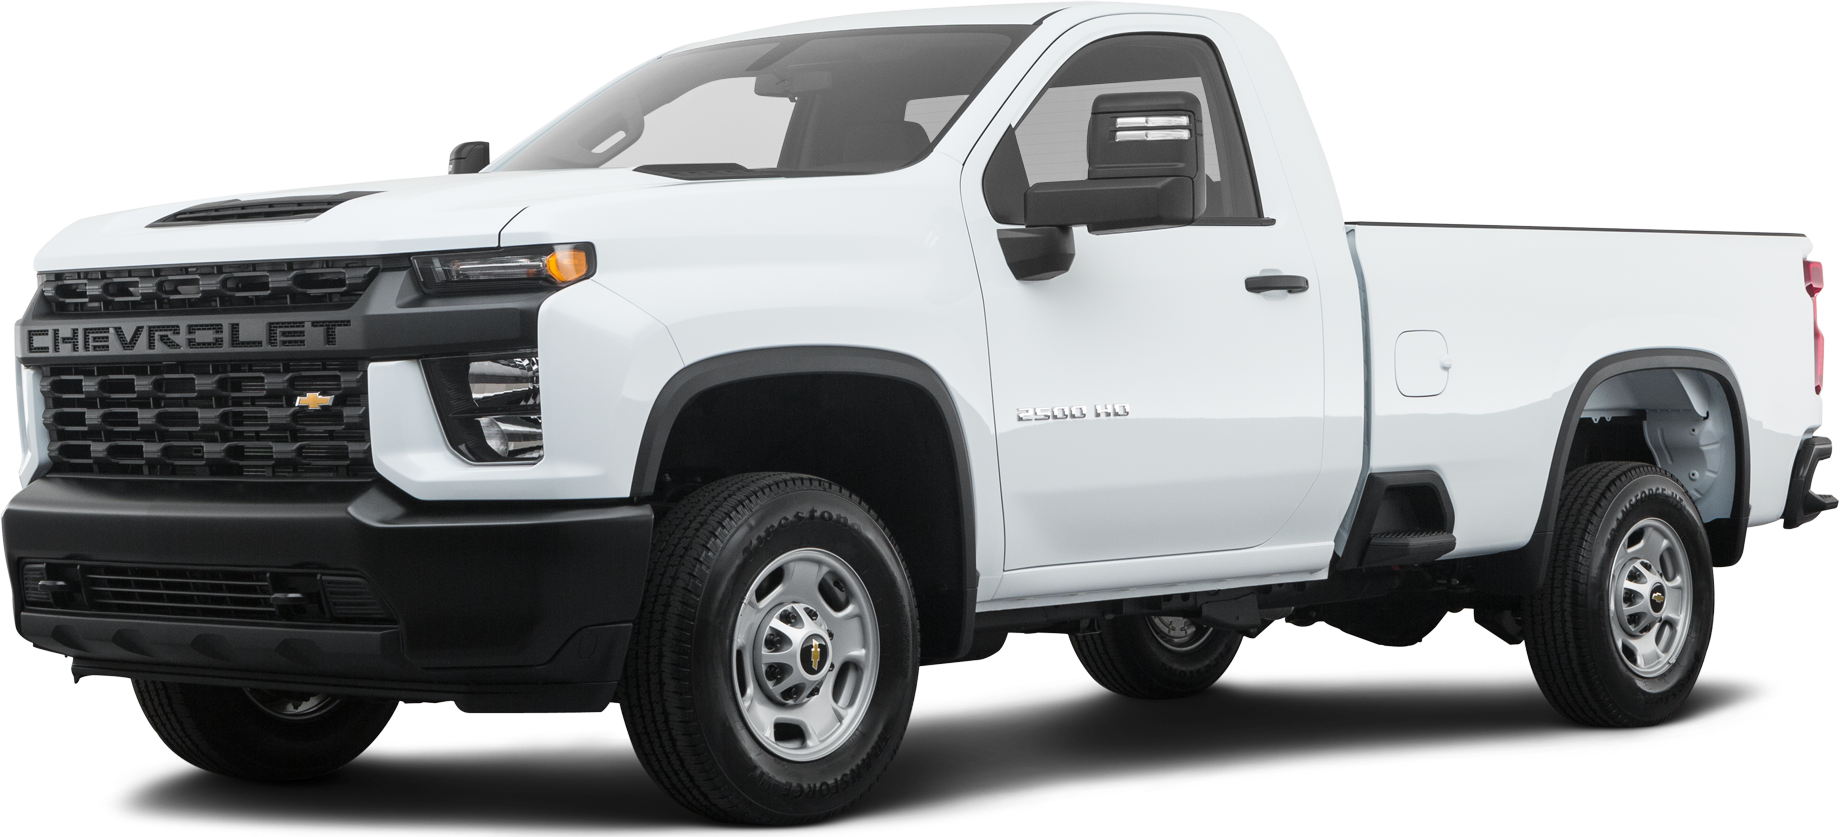 2022 Chevrolet Silverado 2500 Price Reviews Pictures And More Kelley